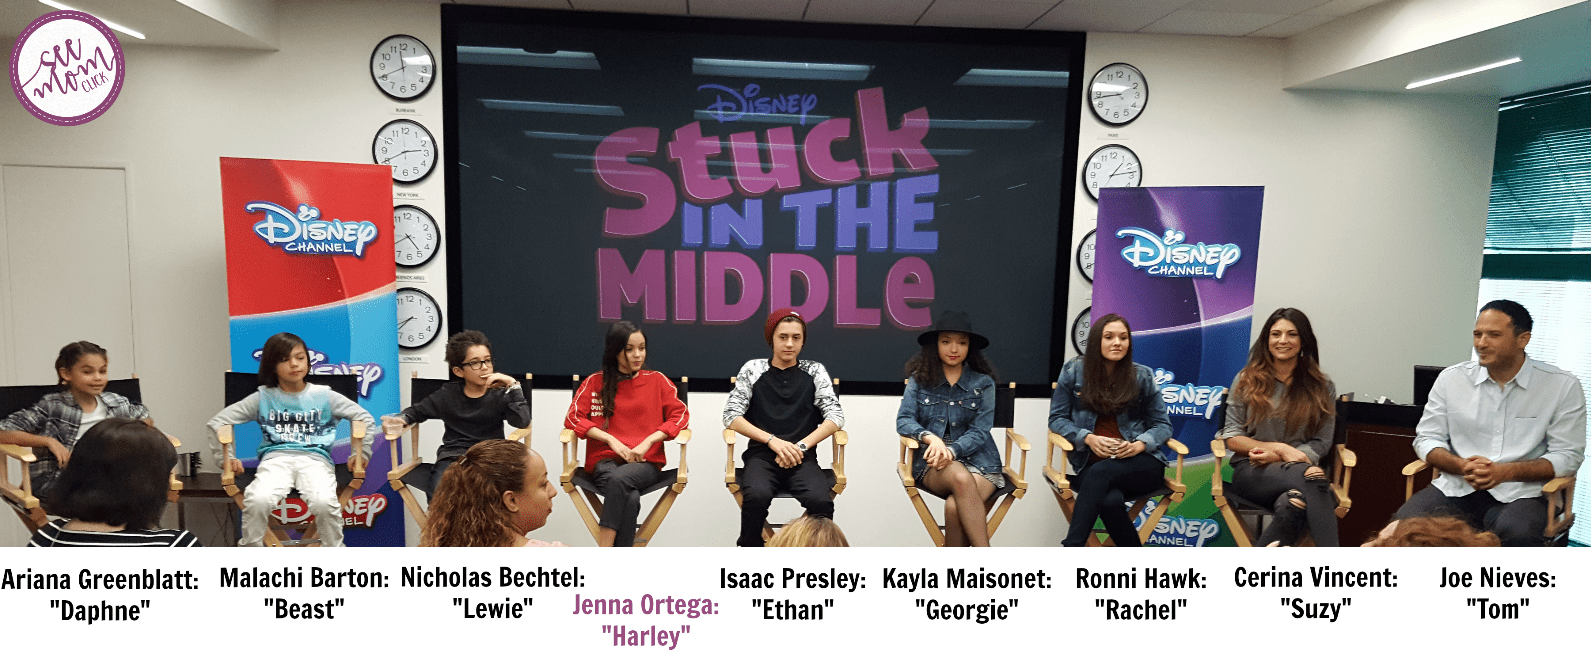 Disney Channel's Stuck In The Middle Short-Form Series will air between seasons this winter. See what the cast had to say about their work on this show!